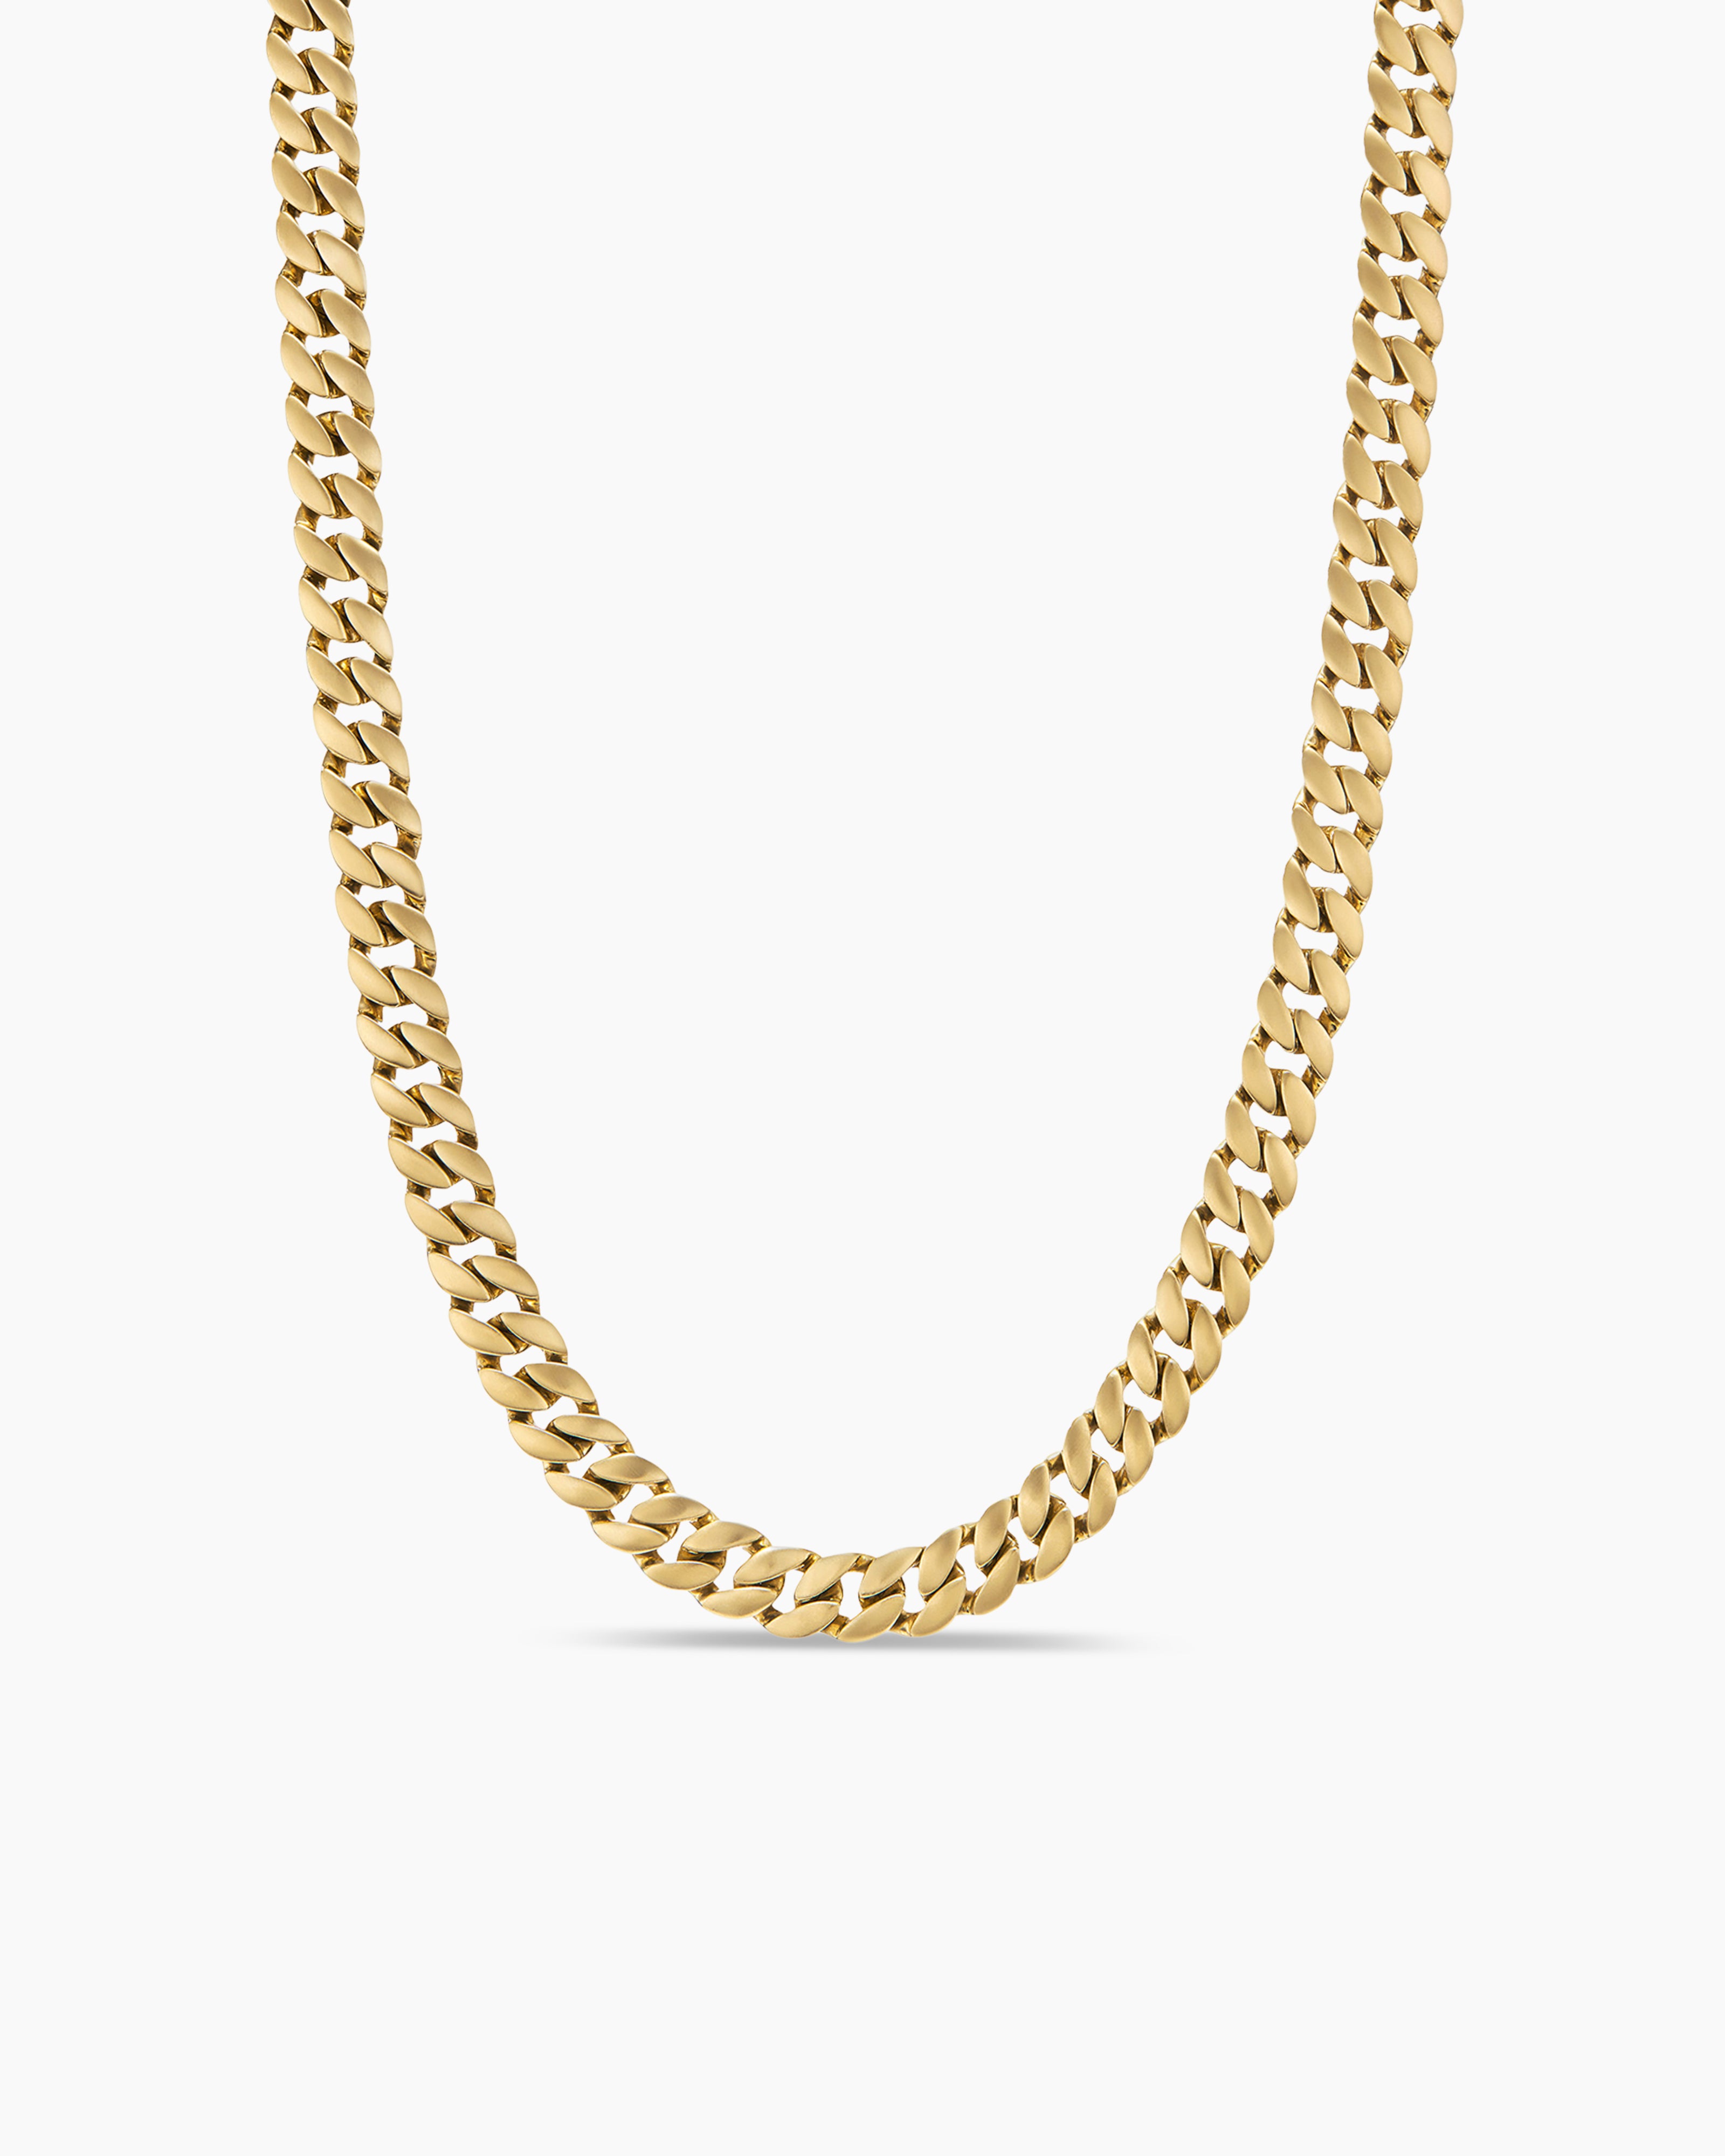 Curb Chain Necklace Gold Necklace Gold Chain Link Necklace 